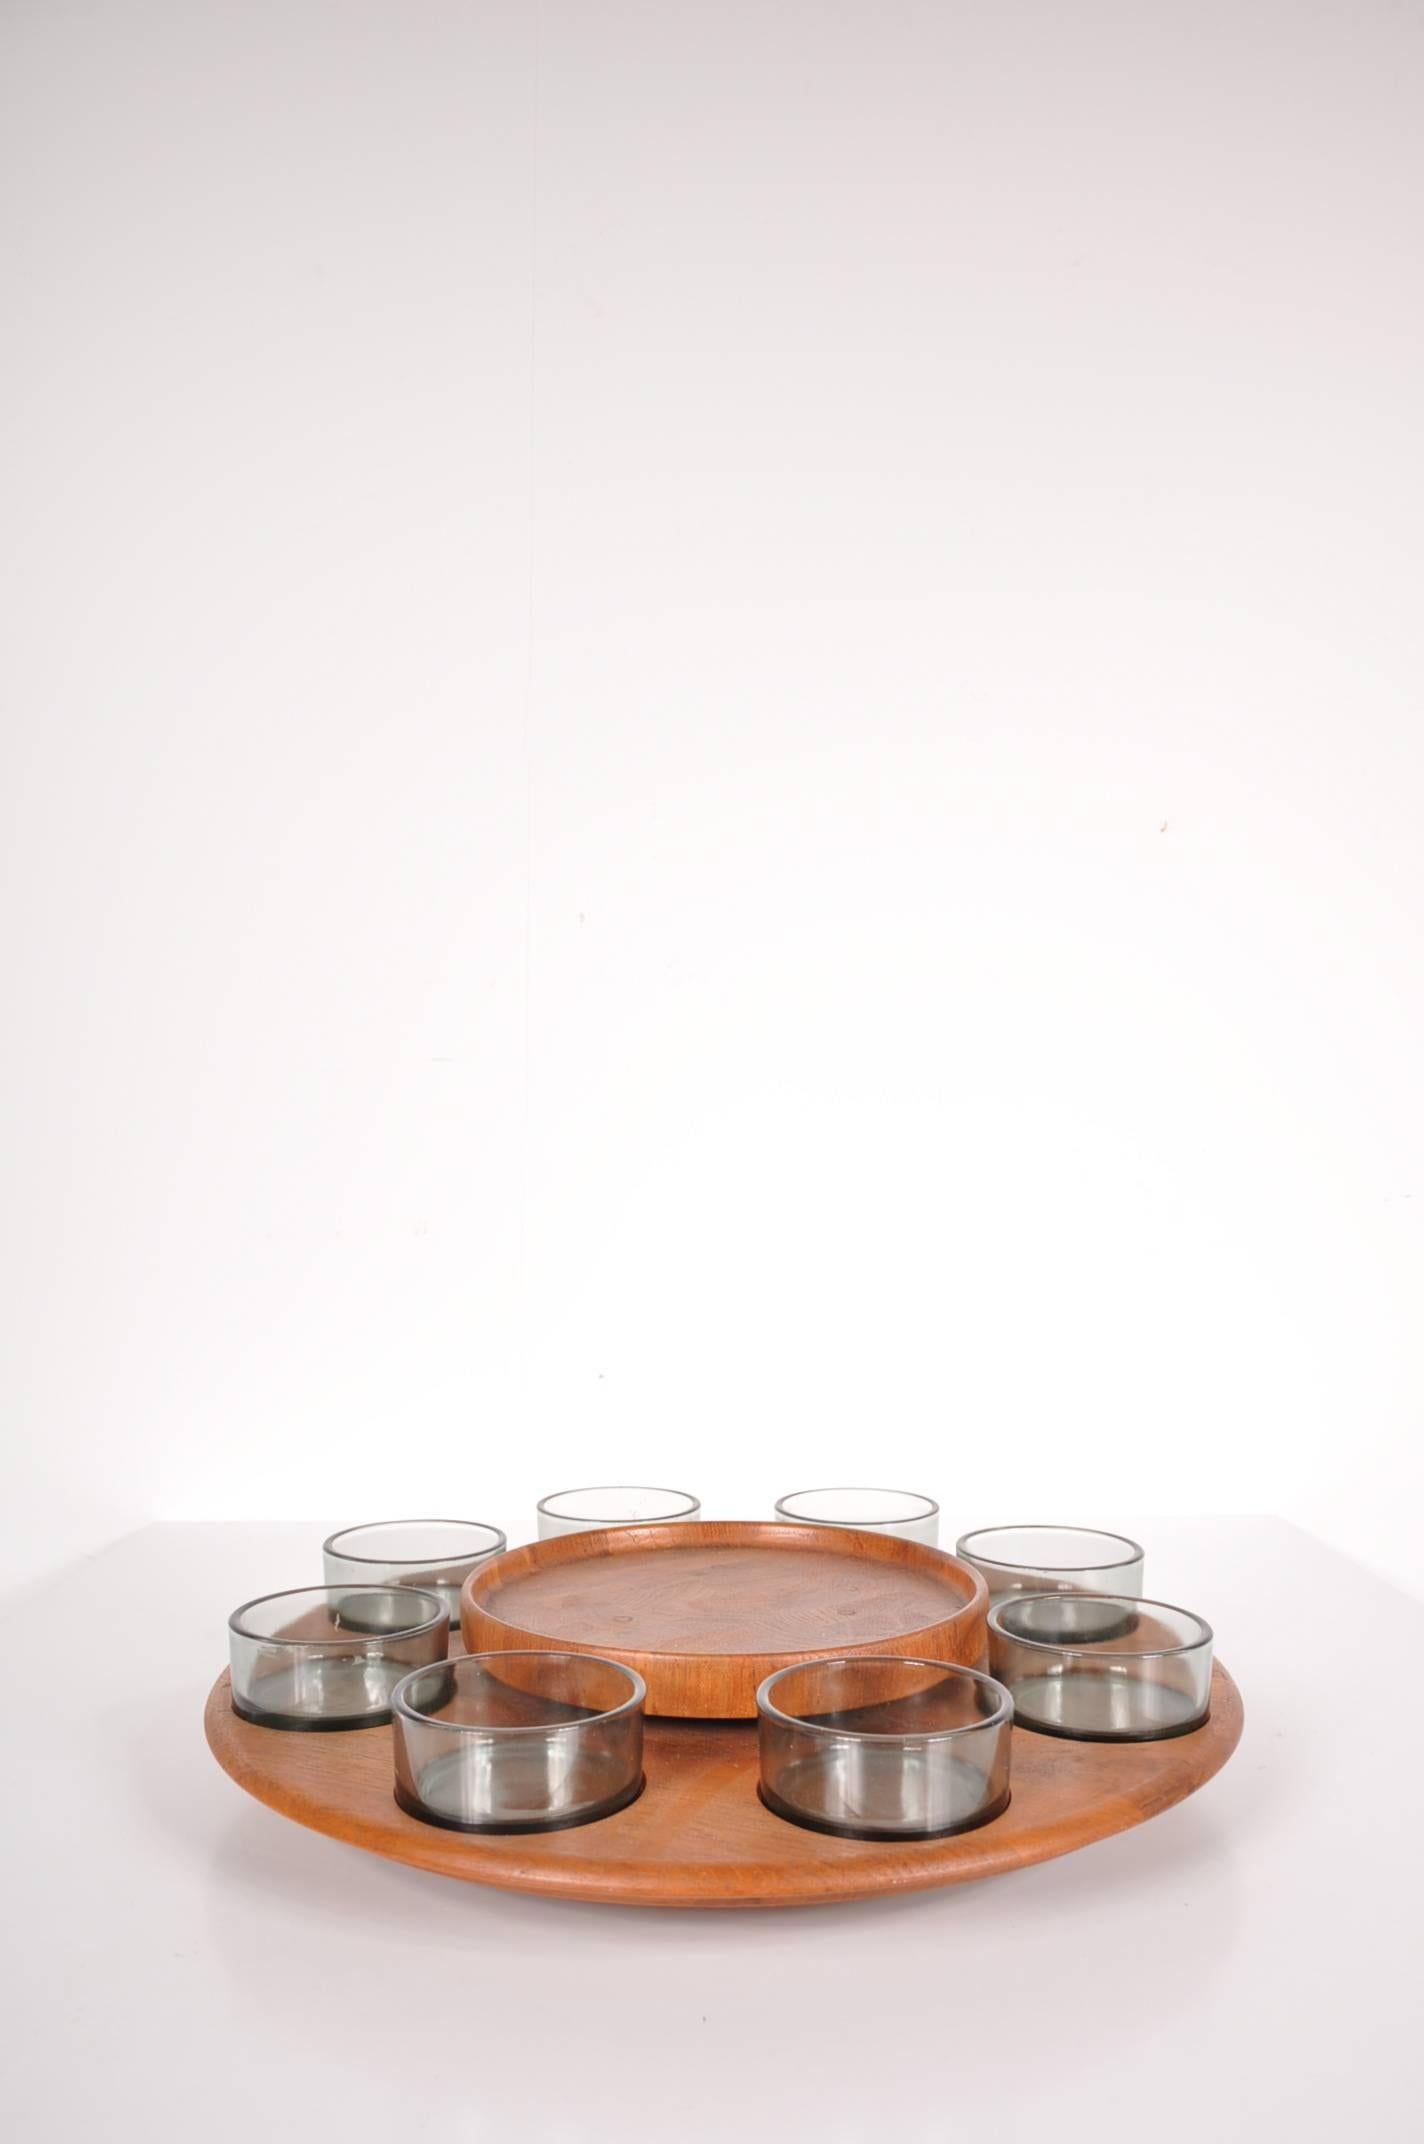 Mid-Century Modern Carousel Serving Tray by Digsmed Denmark, circa 1950